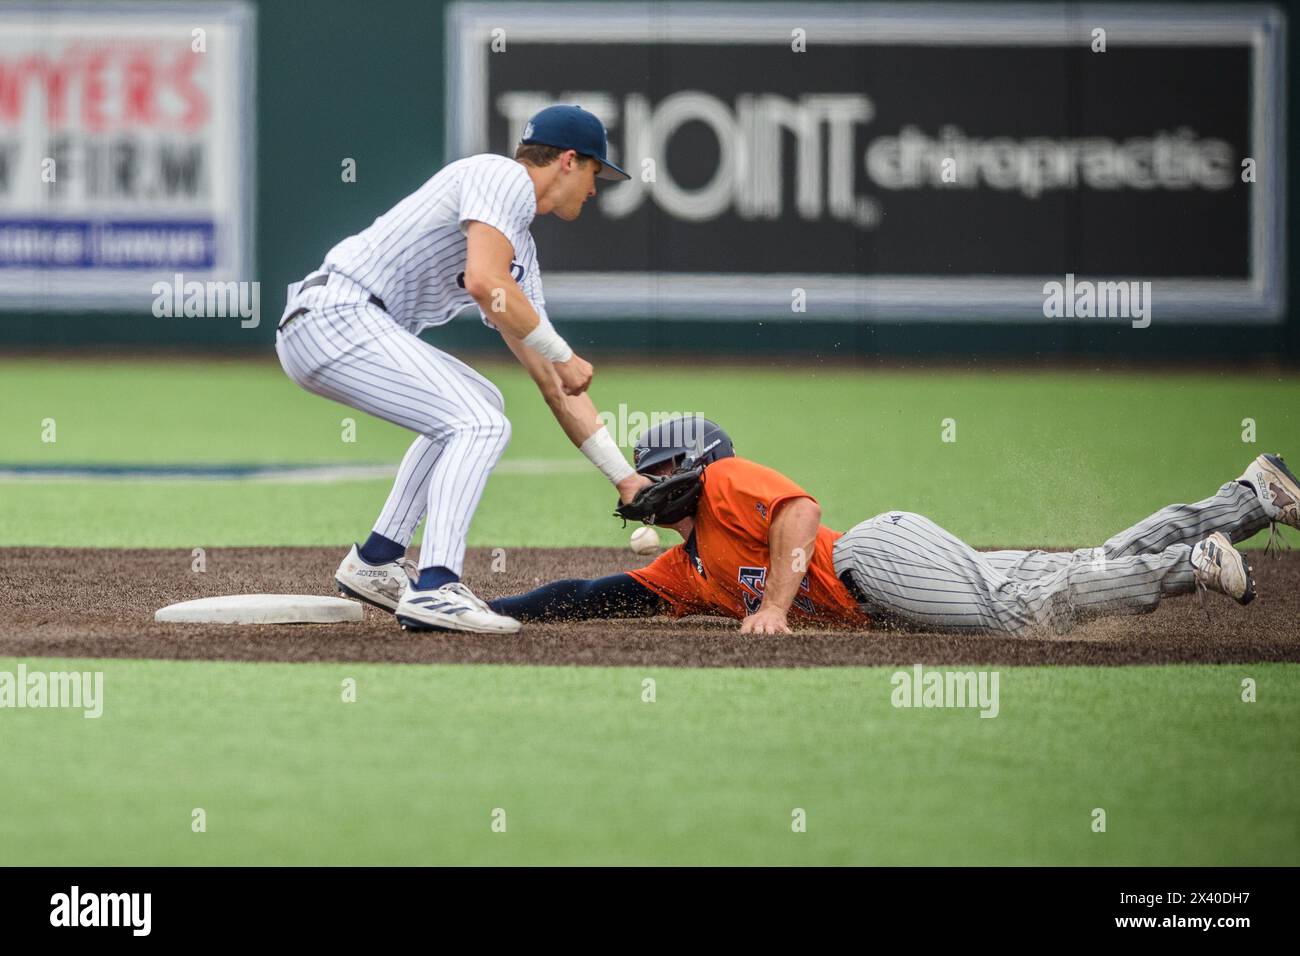 Houston, Texas, USA. 28th Apr, 2024. Rice Owls second baseman Pierce Gallo (3) attempts to tag UTSA Roadrunners catcher Andrew Stucky (27) at second base during the NCAA baseball game between the UTSA Roadrunners and the Rice Owls at Reckling Park in Houston, Texas. Prentice C. James/CSM/Alamy Live News Stock Photo